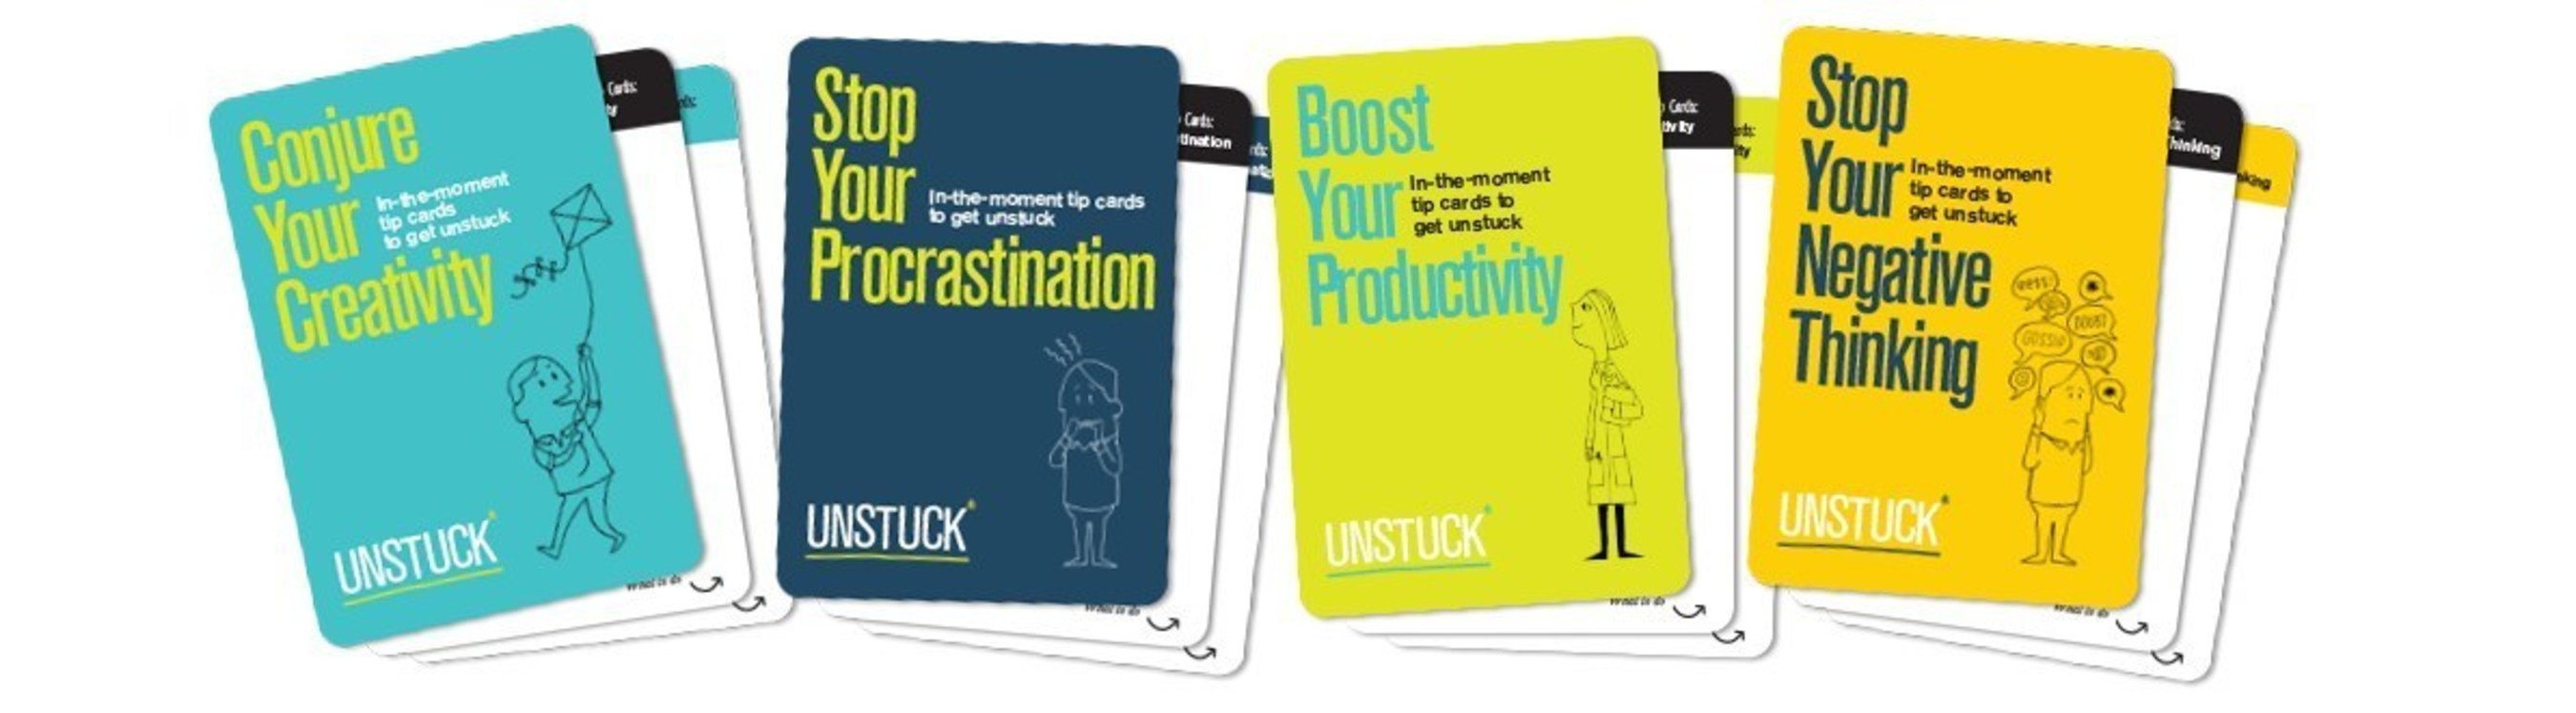 Just in time for the holiday season, Unstuck announces four Tip Card decks that focus in on some of life's most common dilemmas. They make great gifts for colleagues, creative friends or family, and anyone who appreciates light-hearted but effective support in moments of need.